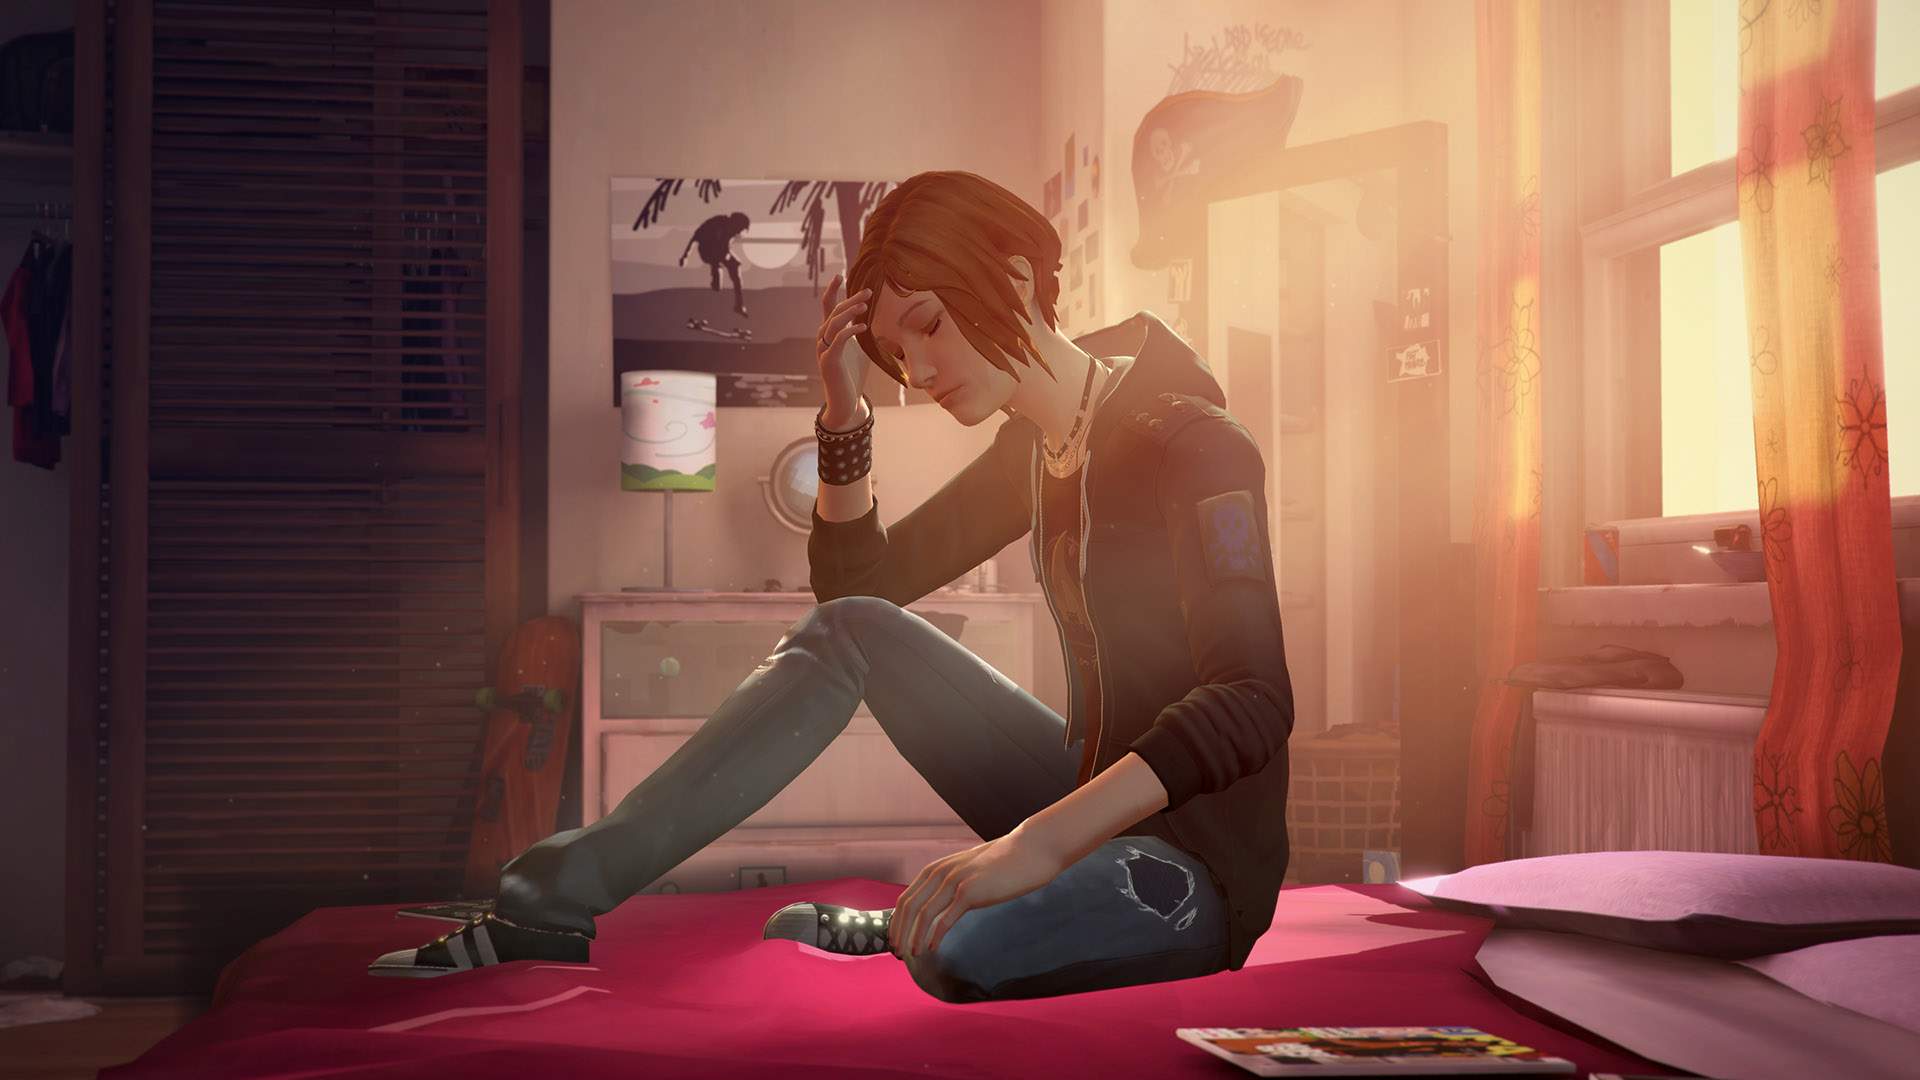 Head in hand, and lost in thought, Chloe sits on her bed as the afternoon sun spills through her window.